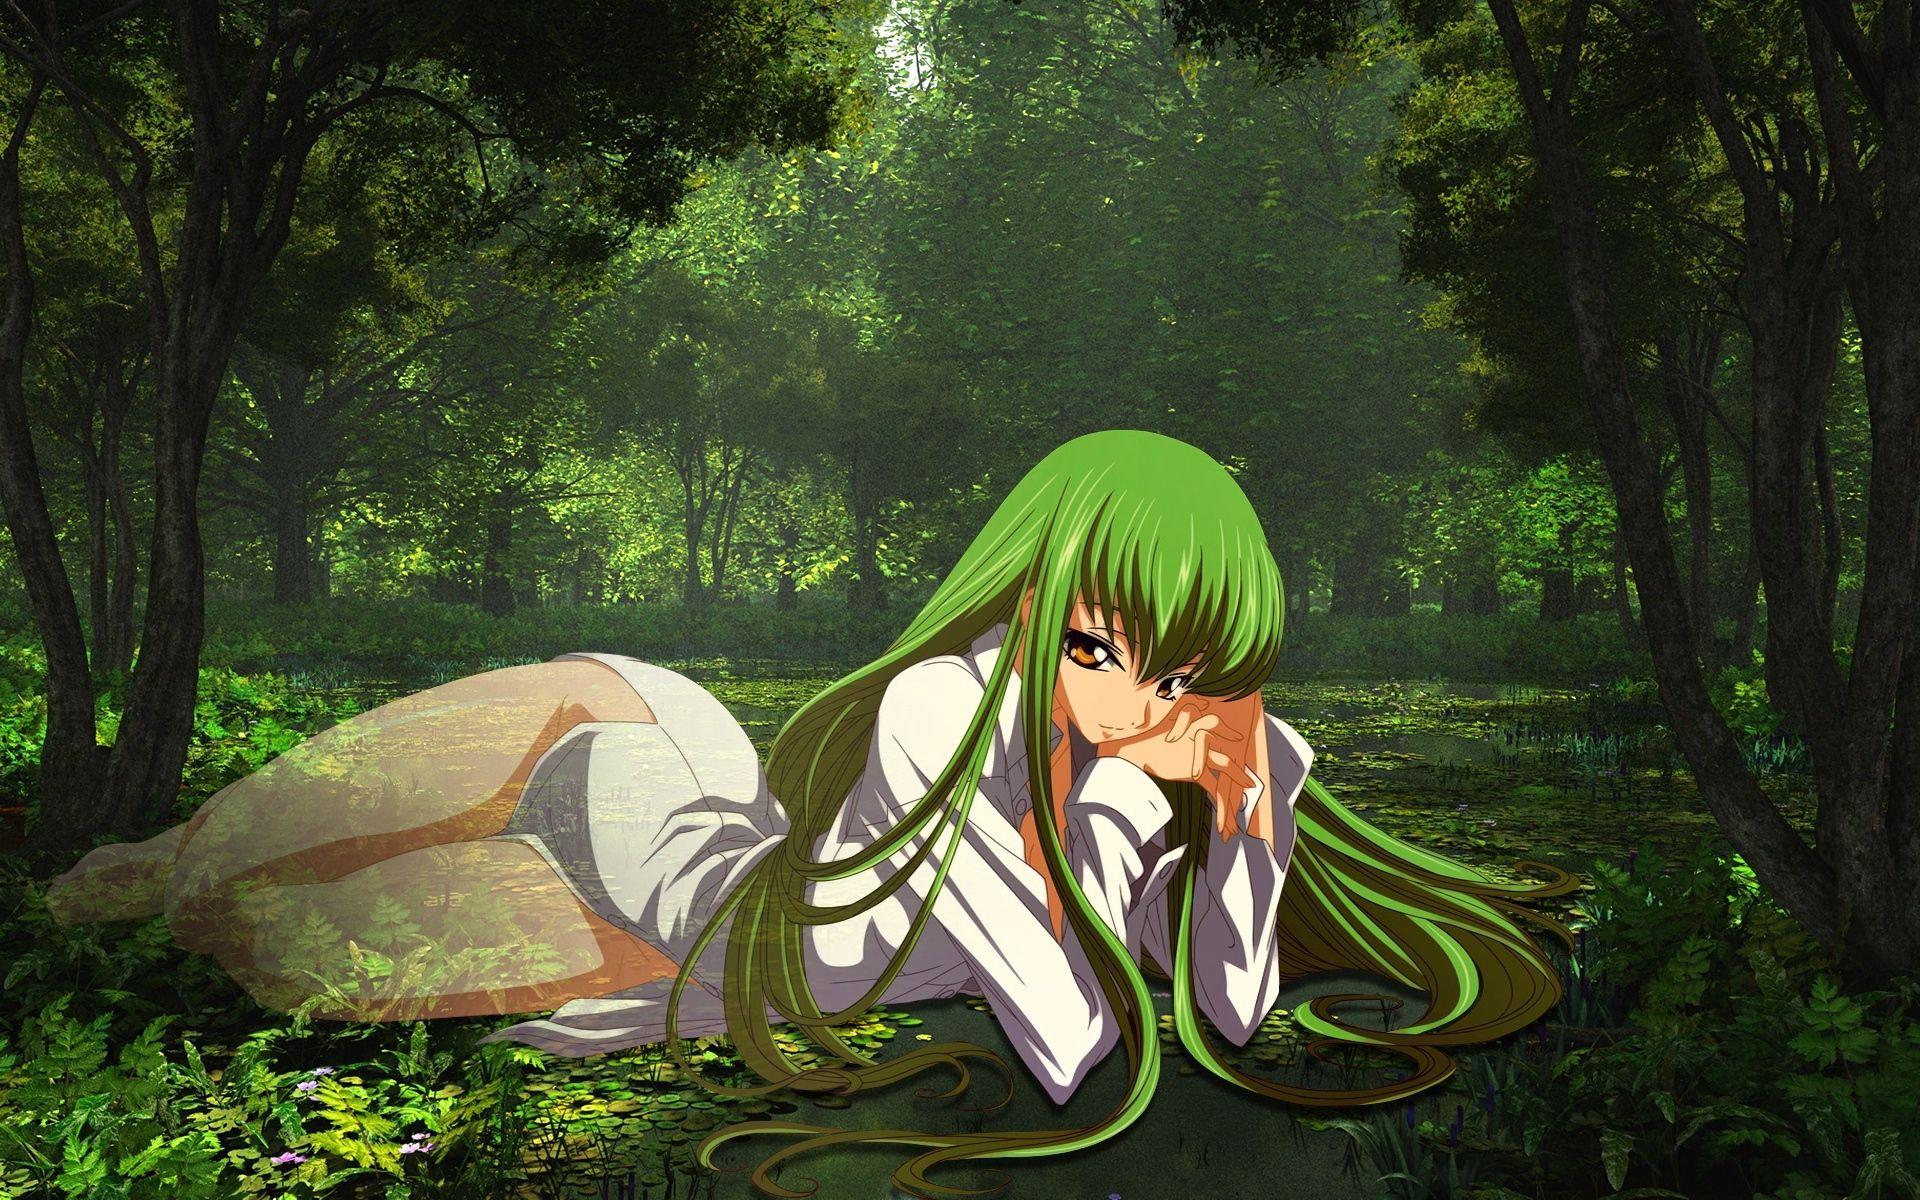 Download wallpaper 1920x1200 anime, girl, green, forest